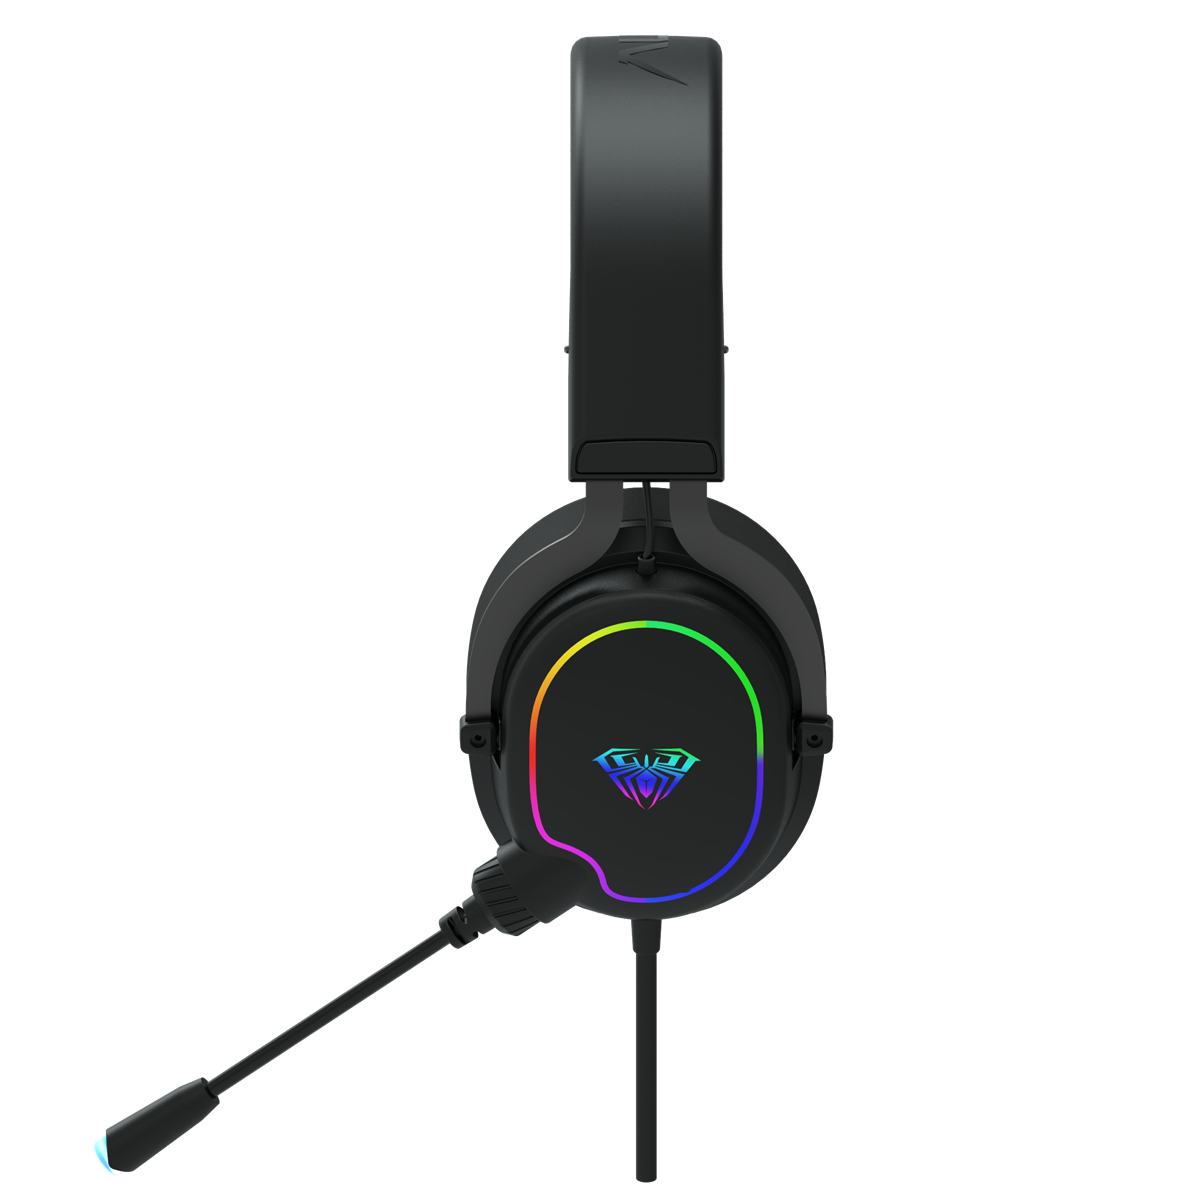 AULA F606 Gaming Headset 3.5Mm Wired 50Mm Driver RGB Light Bass Stereo Surround Sound Lightweight Headset with Microphone for Computer Laptop PC Gamer